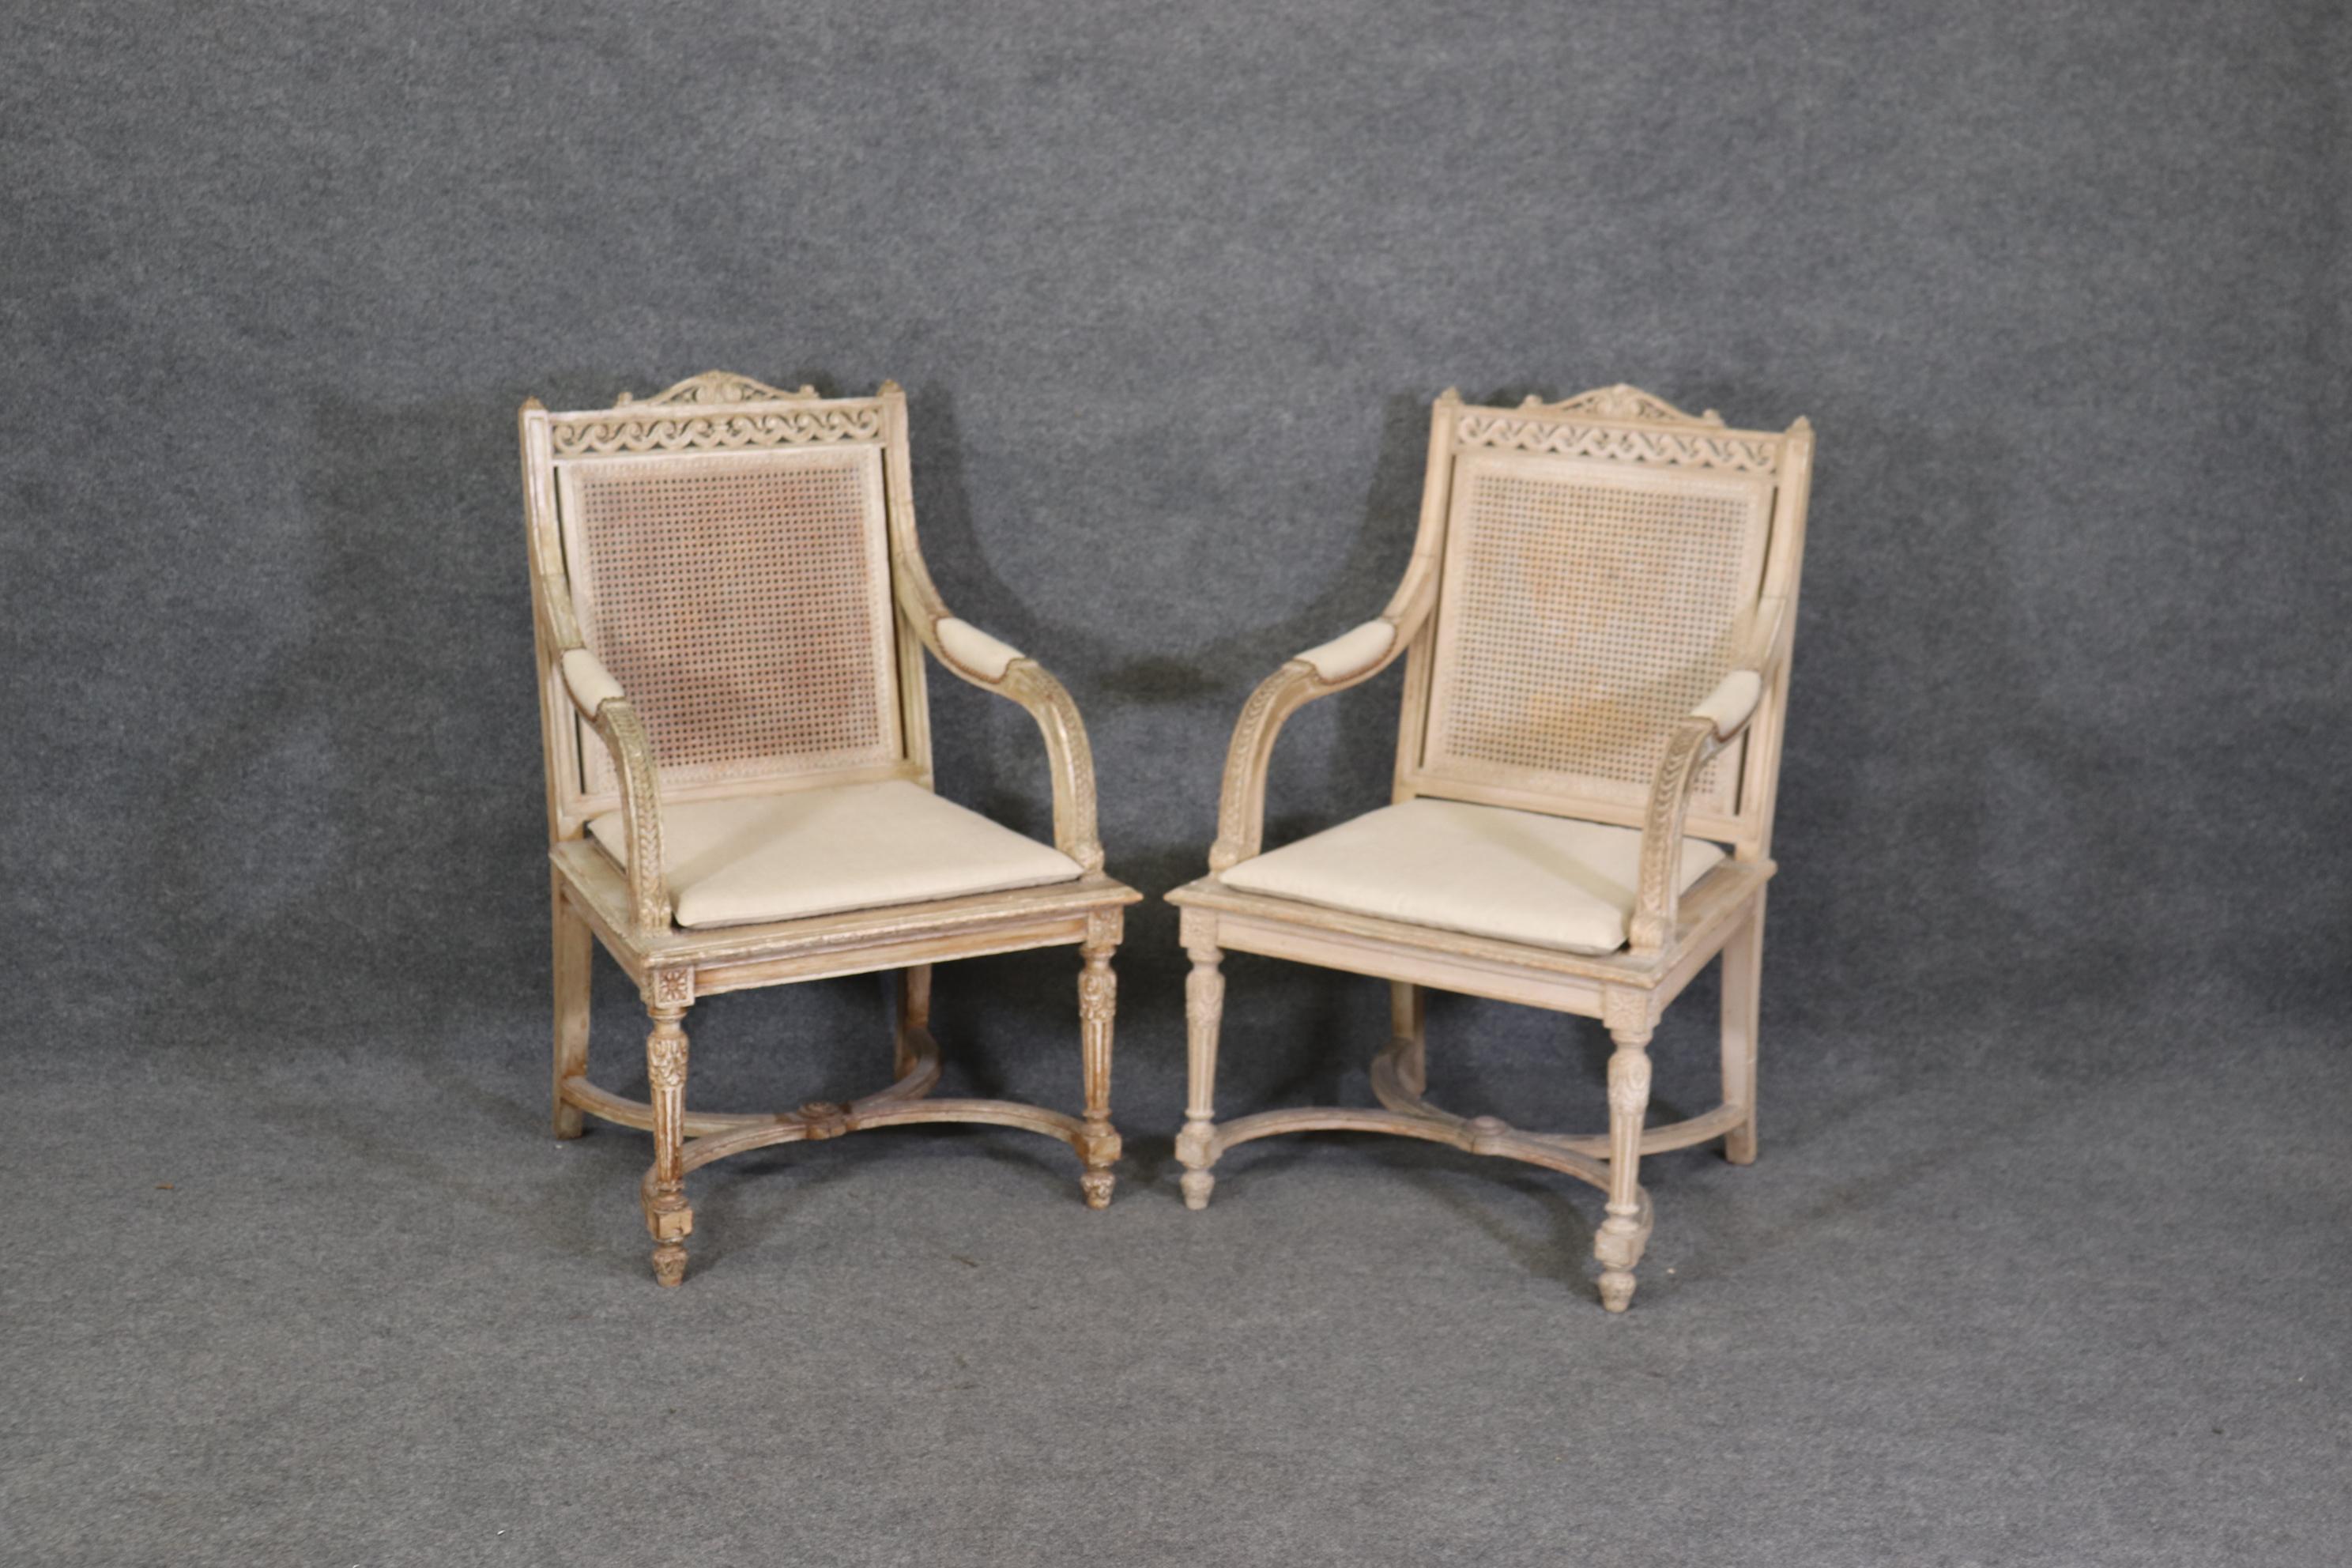 This is a beautiful pair of antique cane and paint decorated cane armchairs that can be used for the head of a dining table. The chairs are very distressed from time and will show paint loss but no damage to the cane.The chairs measure 40.5 tall x